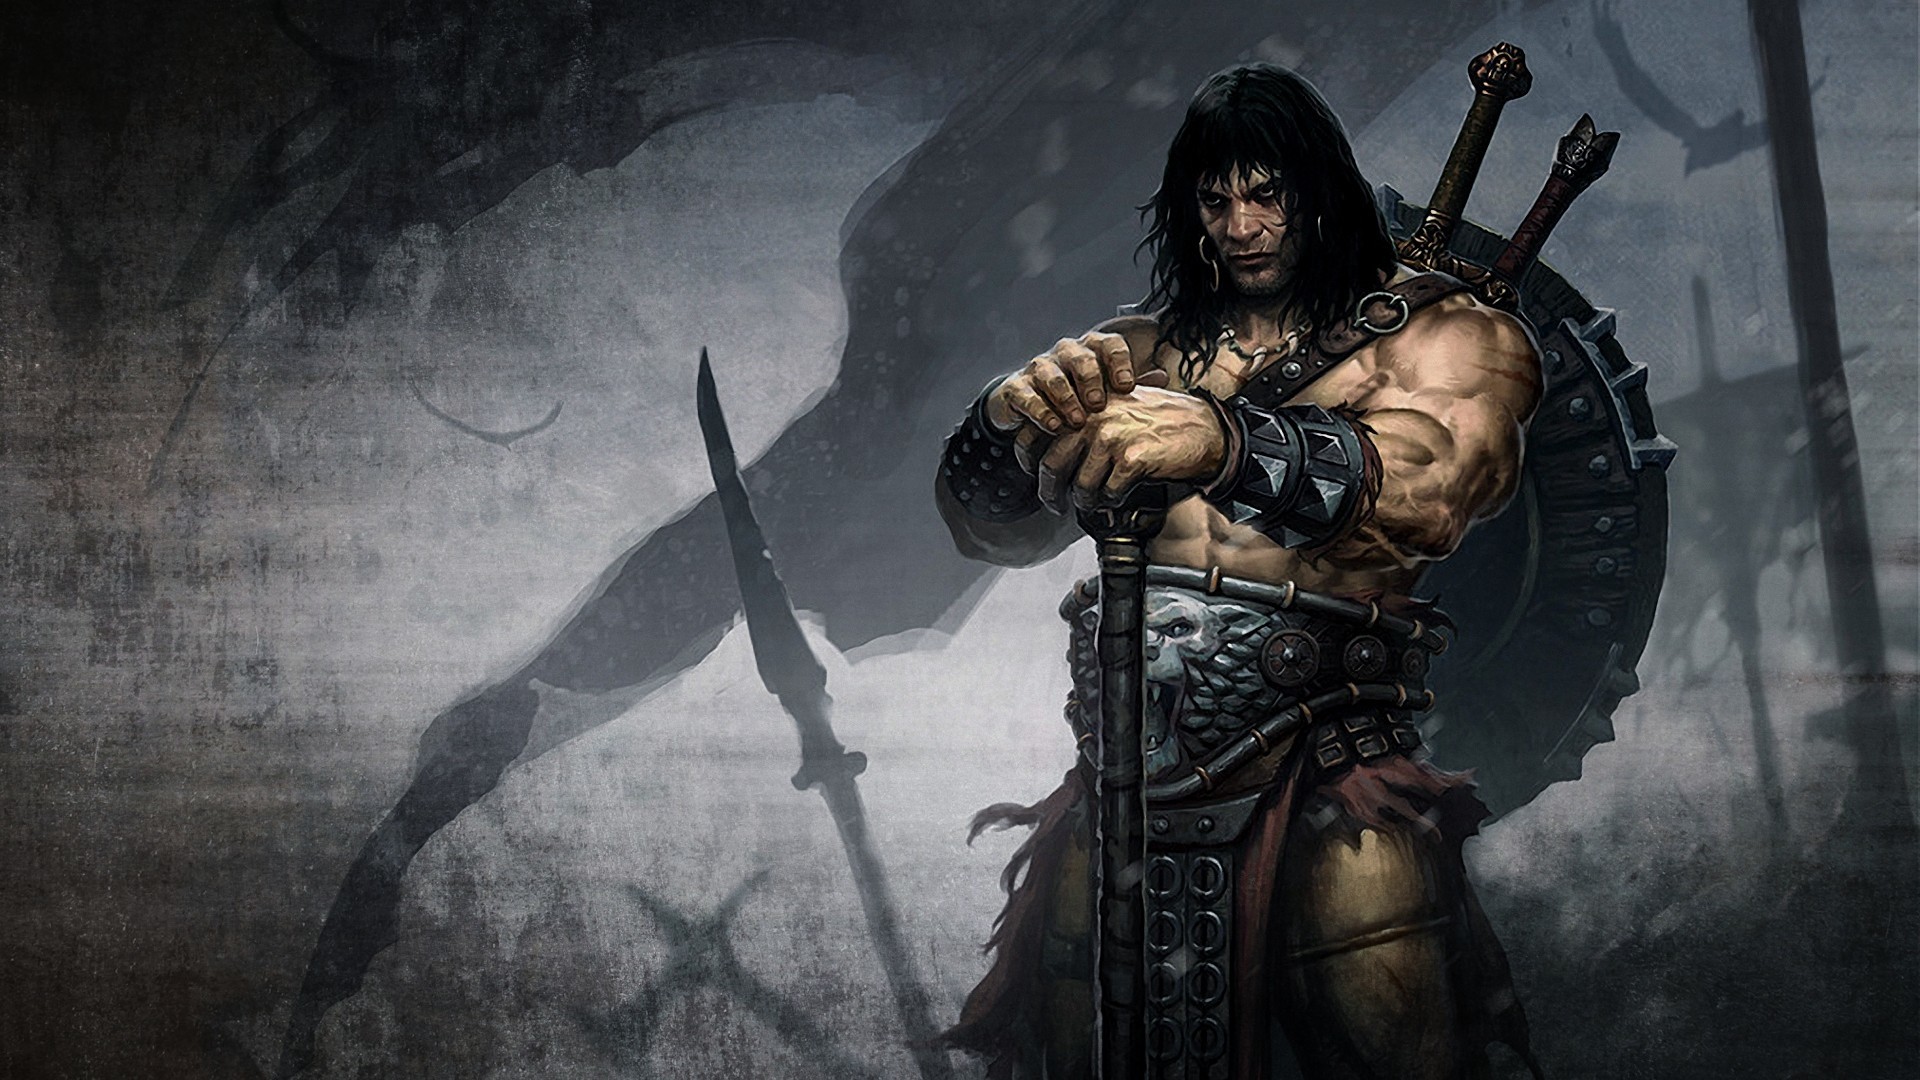 1920x1080 ... Conan The Barbarian HD Wallpapers Backgrounds | HD Wallpapers .